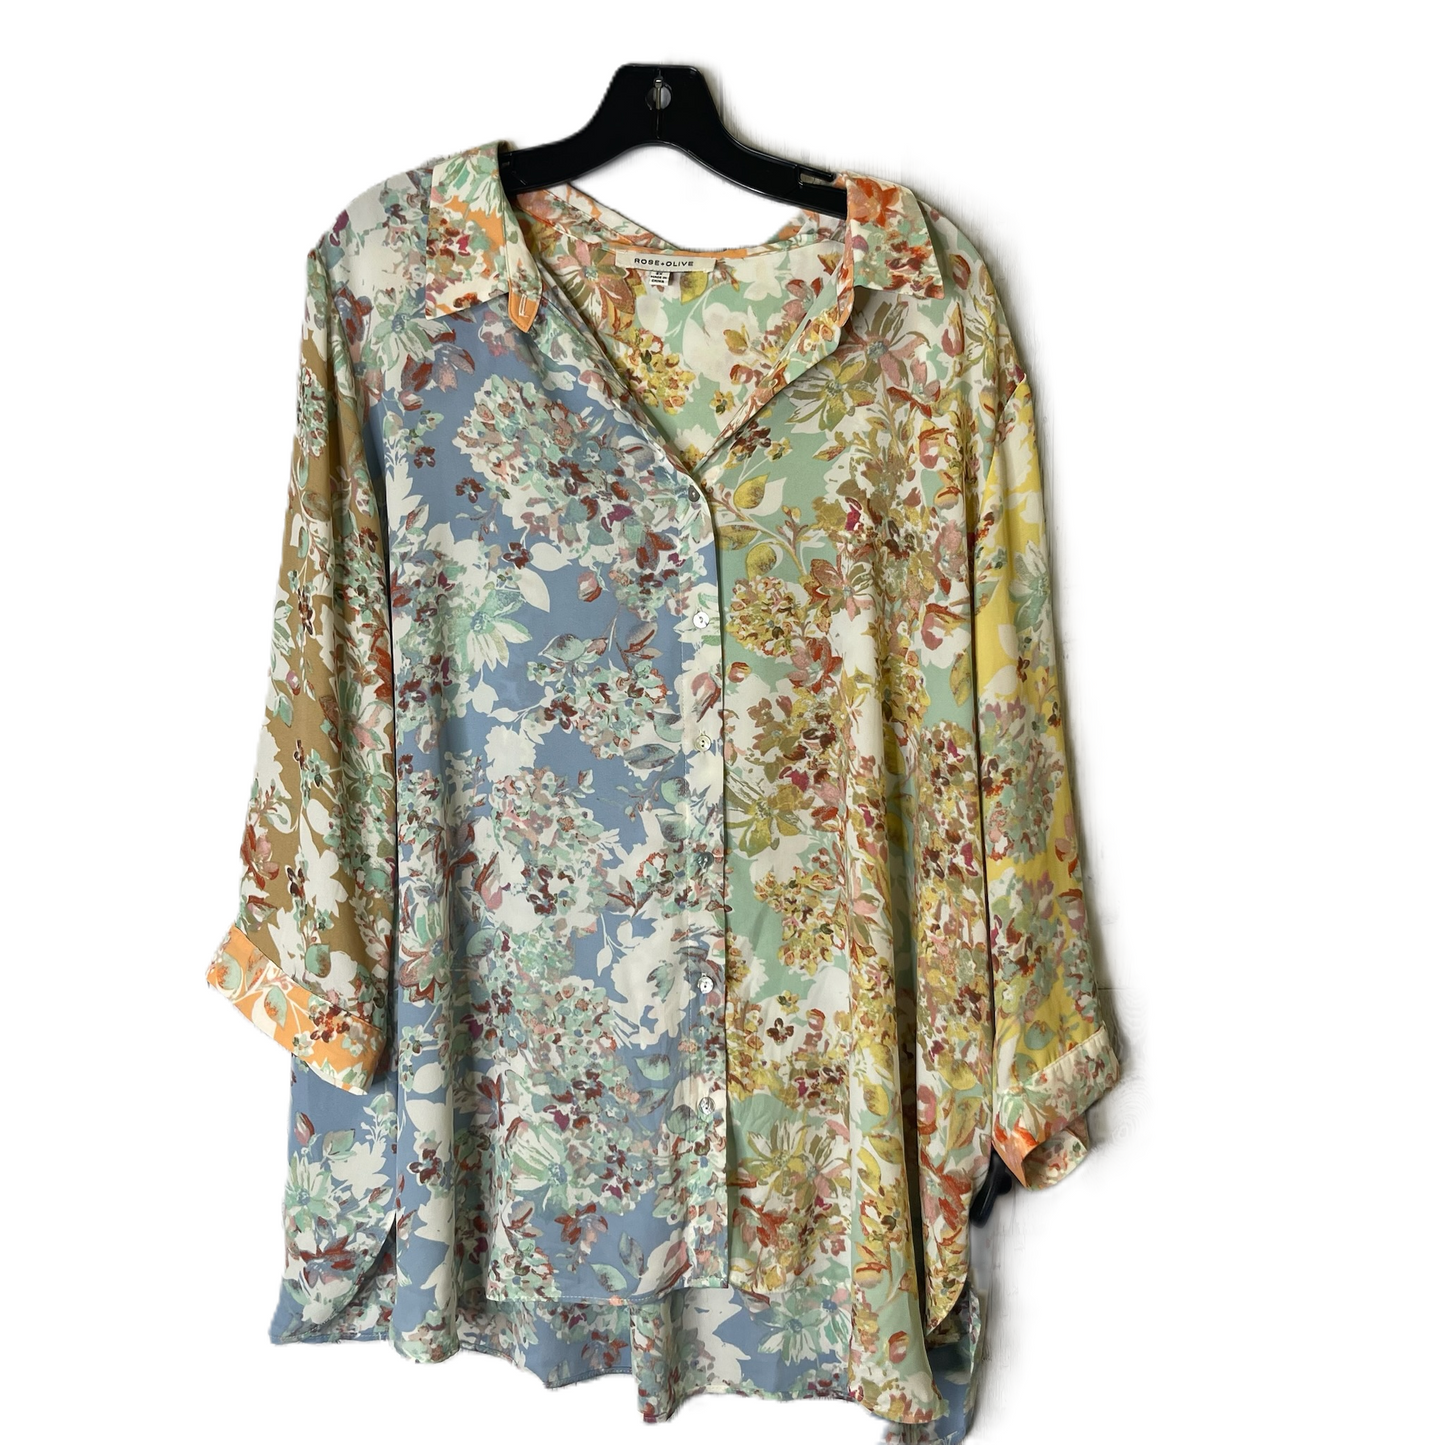 Multi-colored Top Short Sleeve By Rose And Olive, Size: 2x